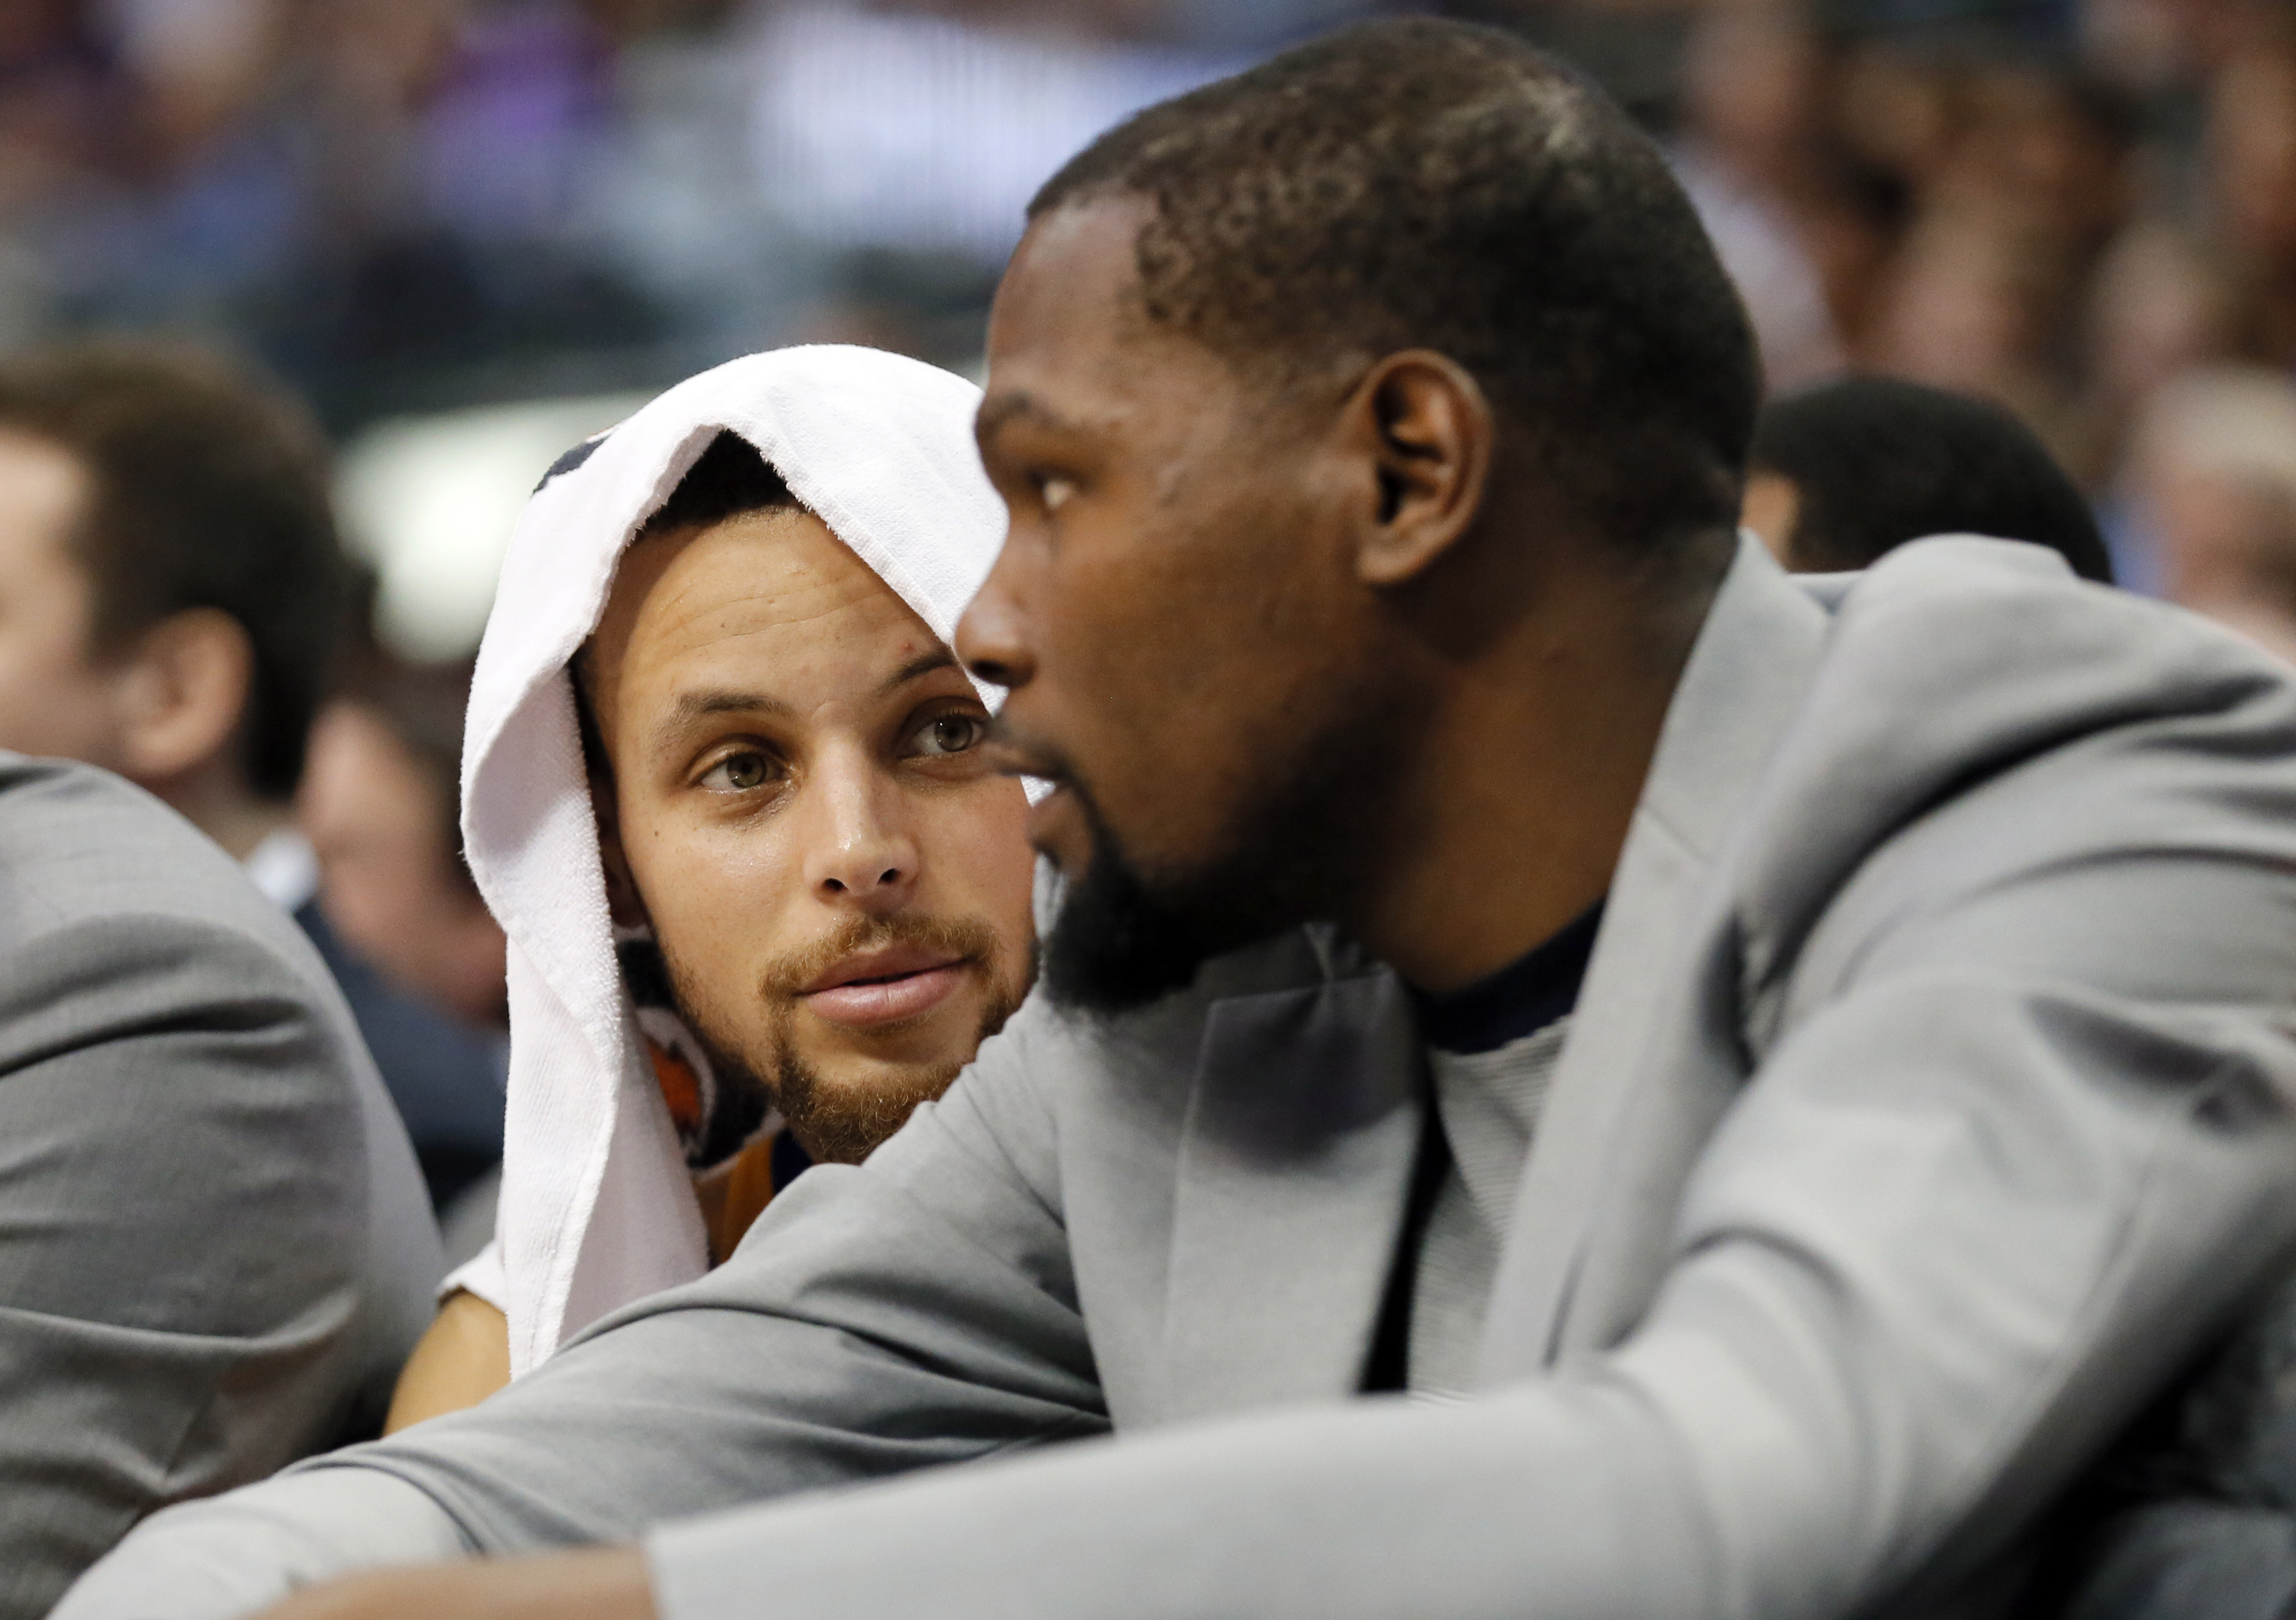 Golden State Warriors guard Stephen Curry, left, talks with Kevin Durant, right, in the first half of an NBA basketball game against the Dallas Mavericks on Tuesday, March 21, 2017, in Dallas. (AP Photo/Tony Gutierrez)